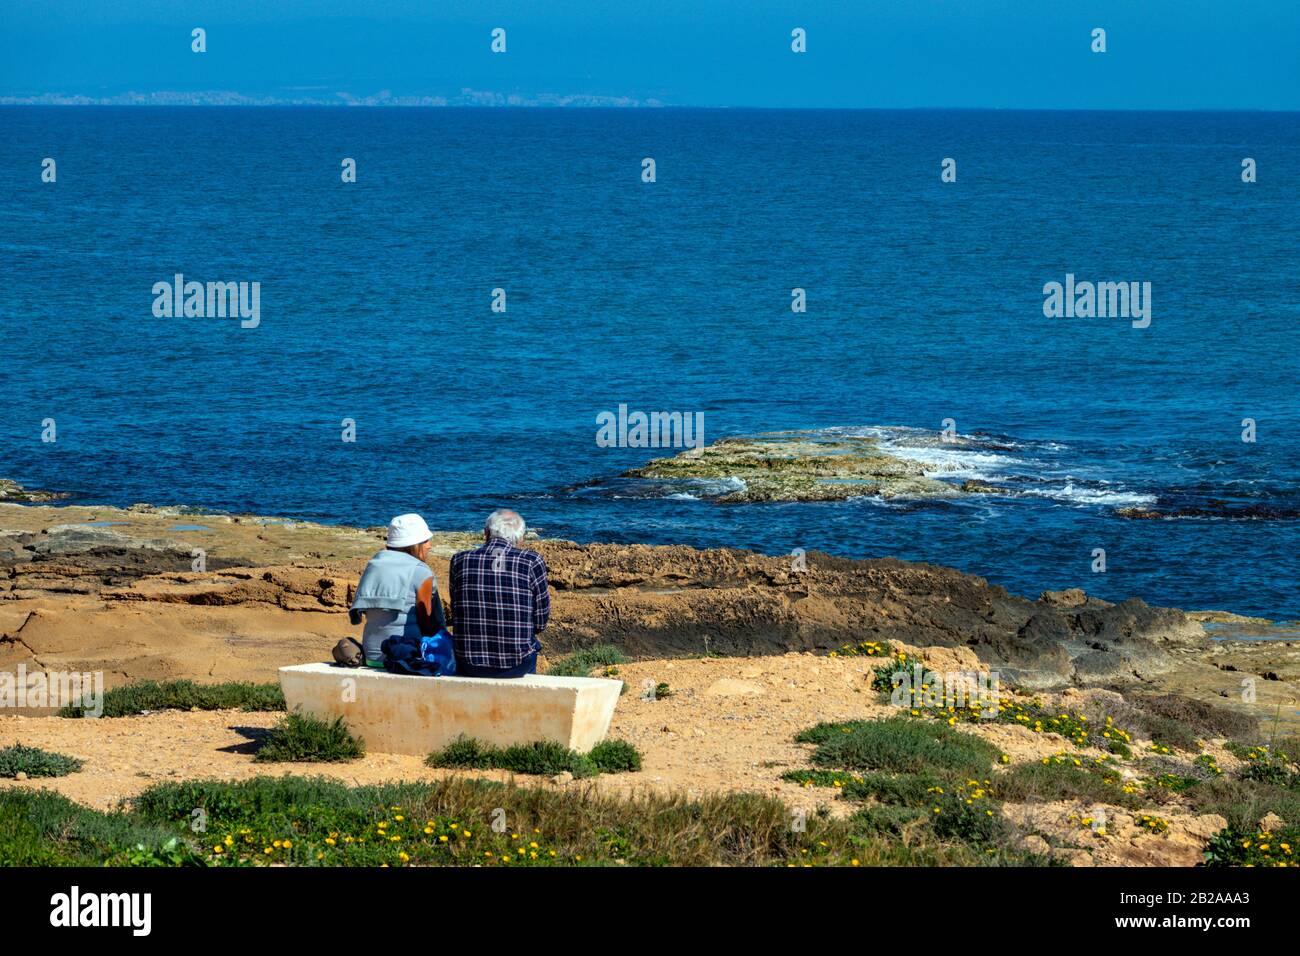 Two old people sitting on concrete bench looking at the ocean, Torrevieja, Costa Blanca, Spain Stock Photo